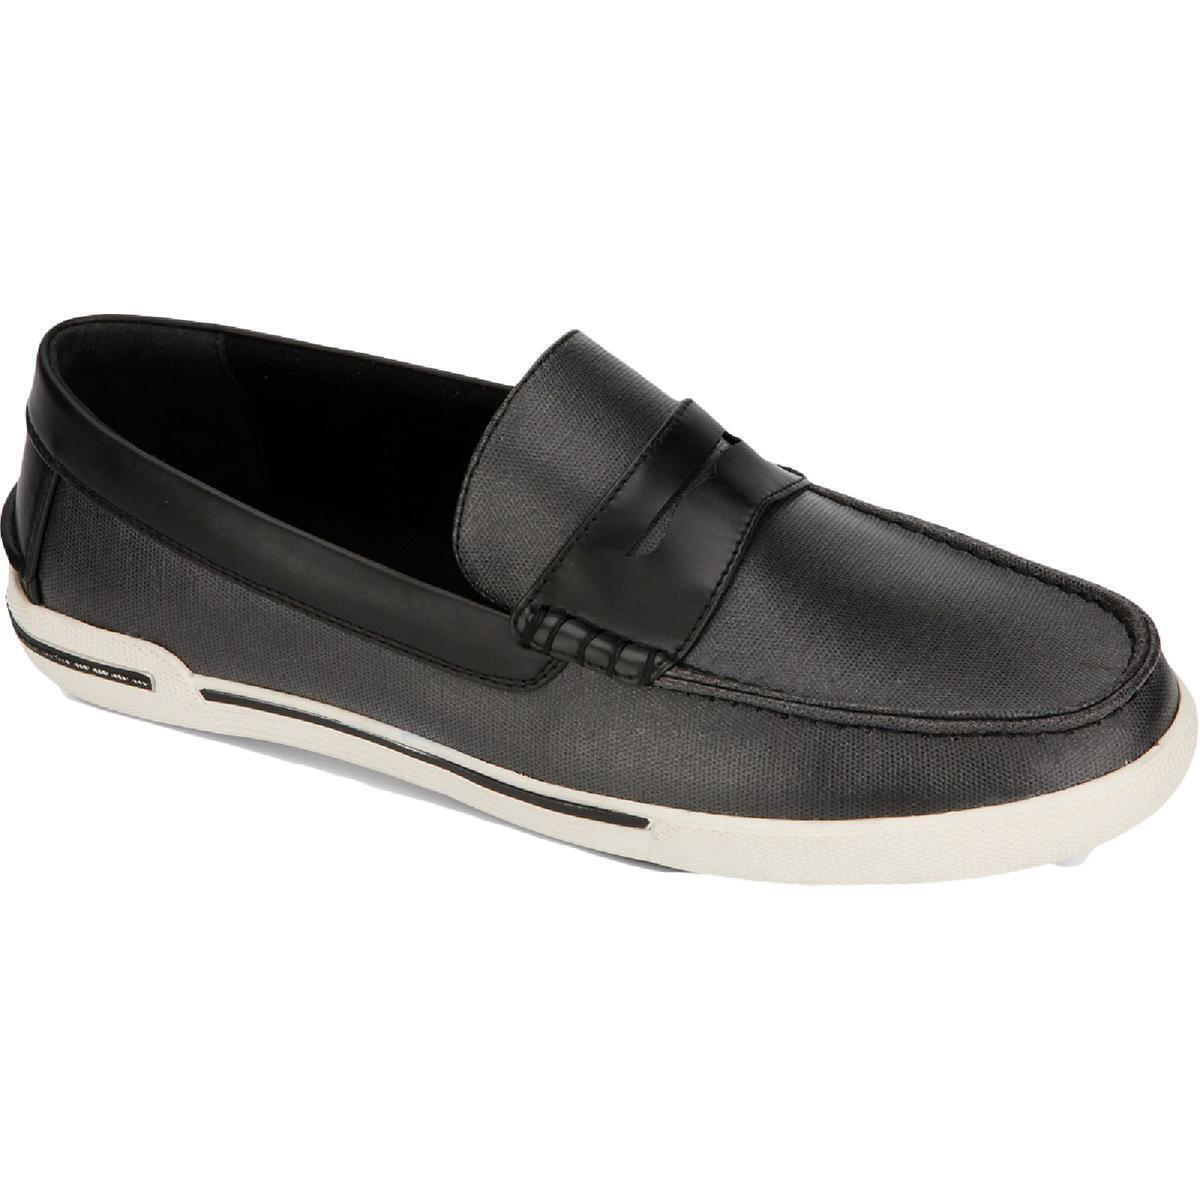 Unlisted Kenneth Cole Mens Un-Anchor Comfort Insole Slip On Boat Shoes alternate image